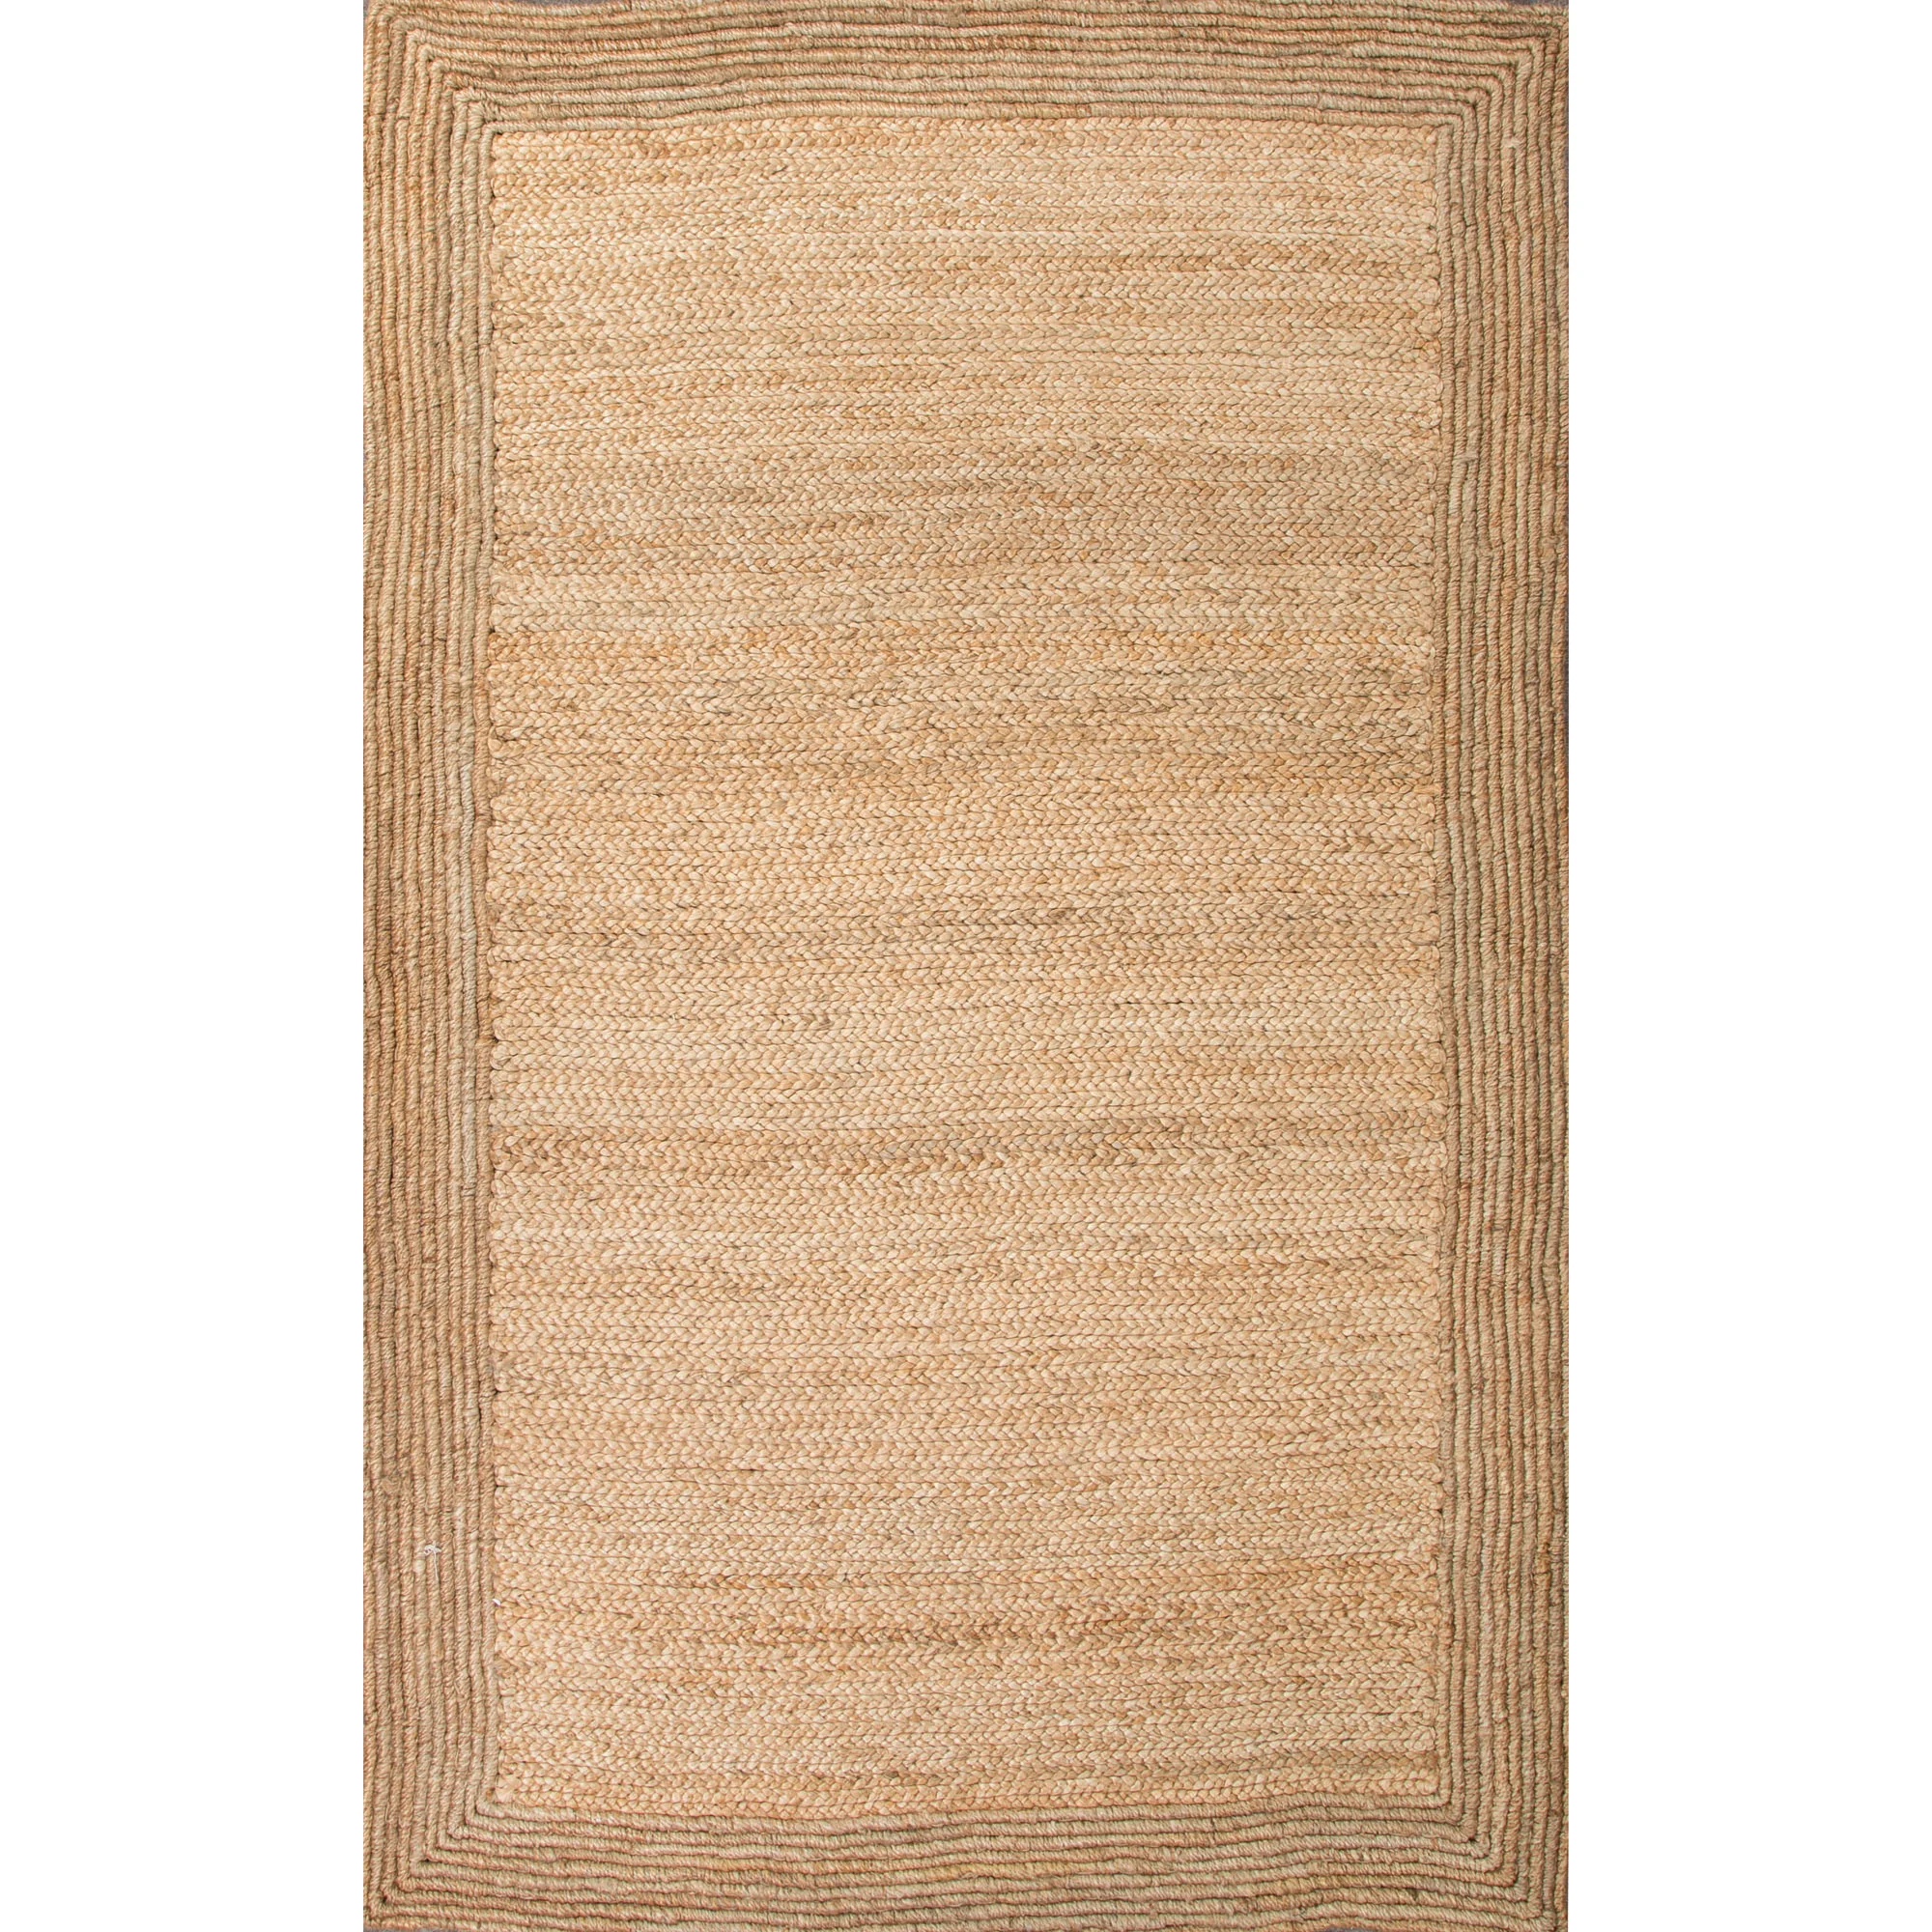 Mateo Aruba Rug - 8' x 10' NIS434449323 by Dalyn at The Furniture Mall